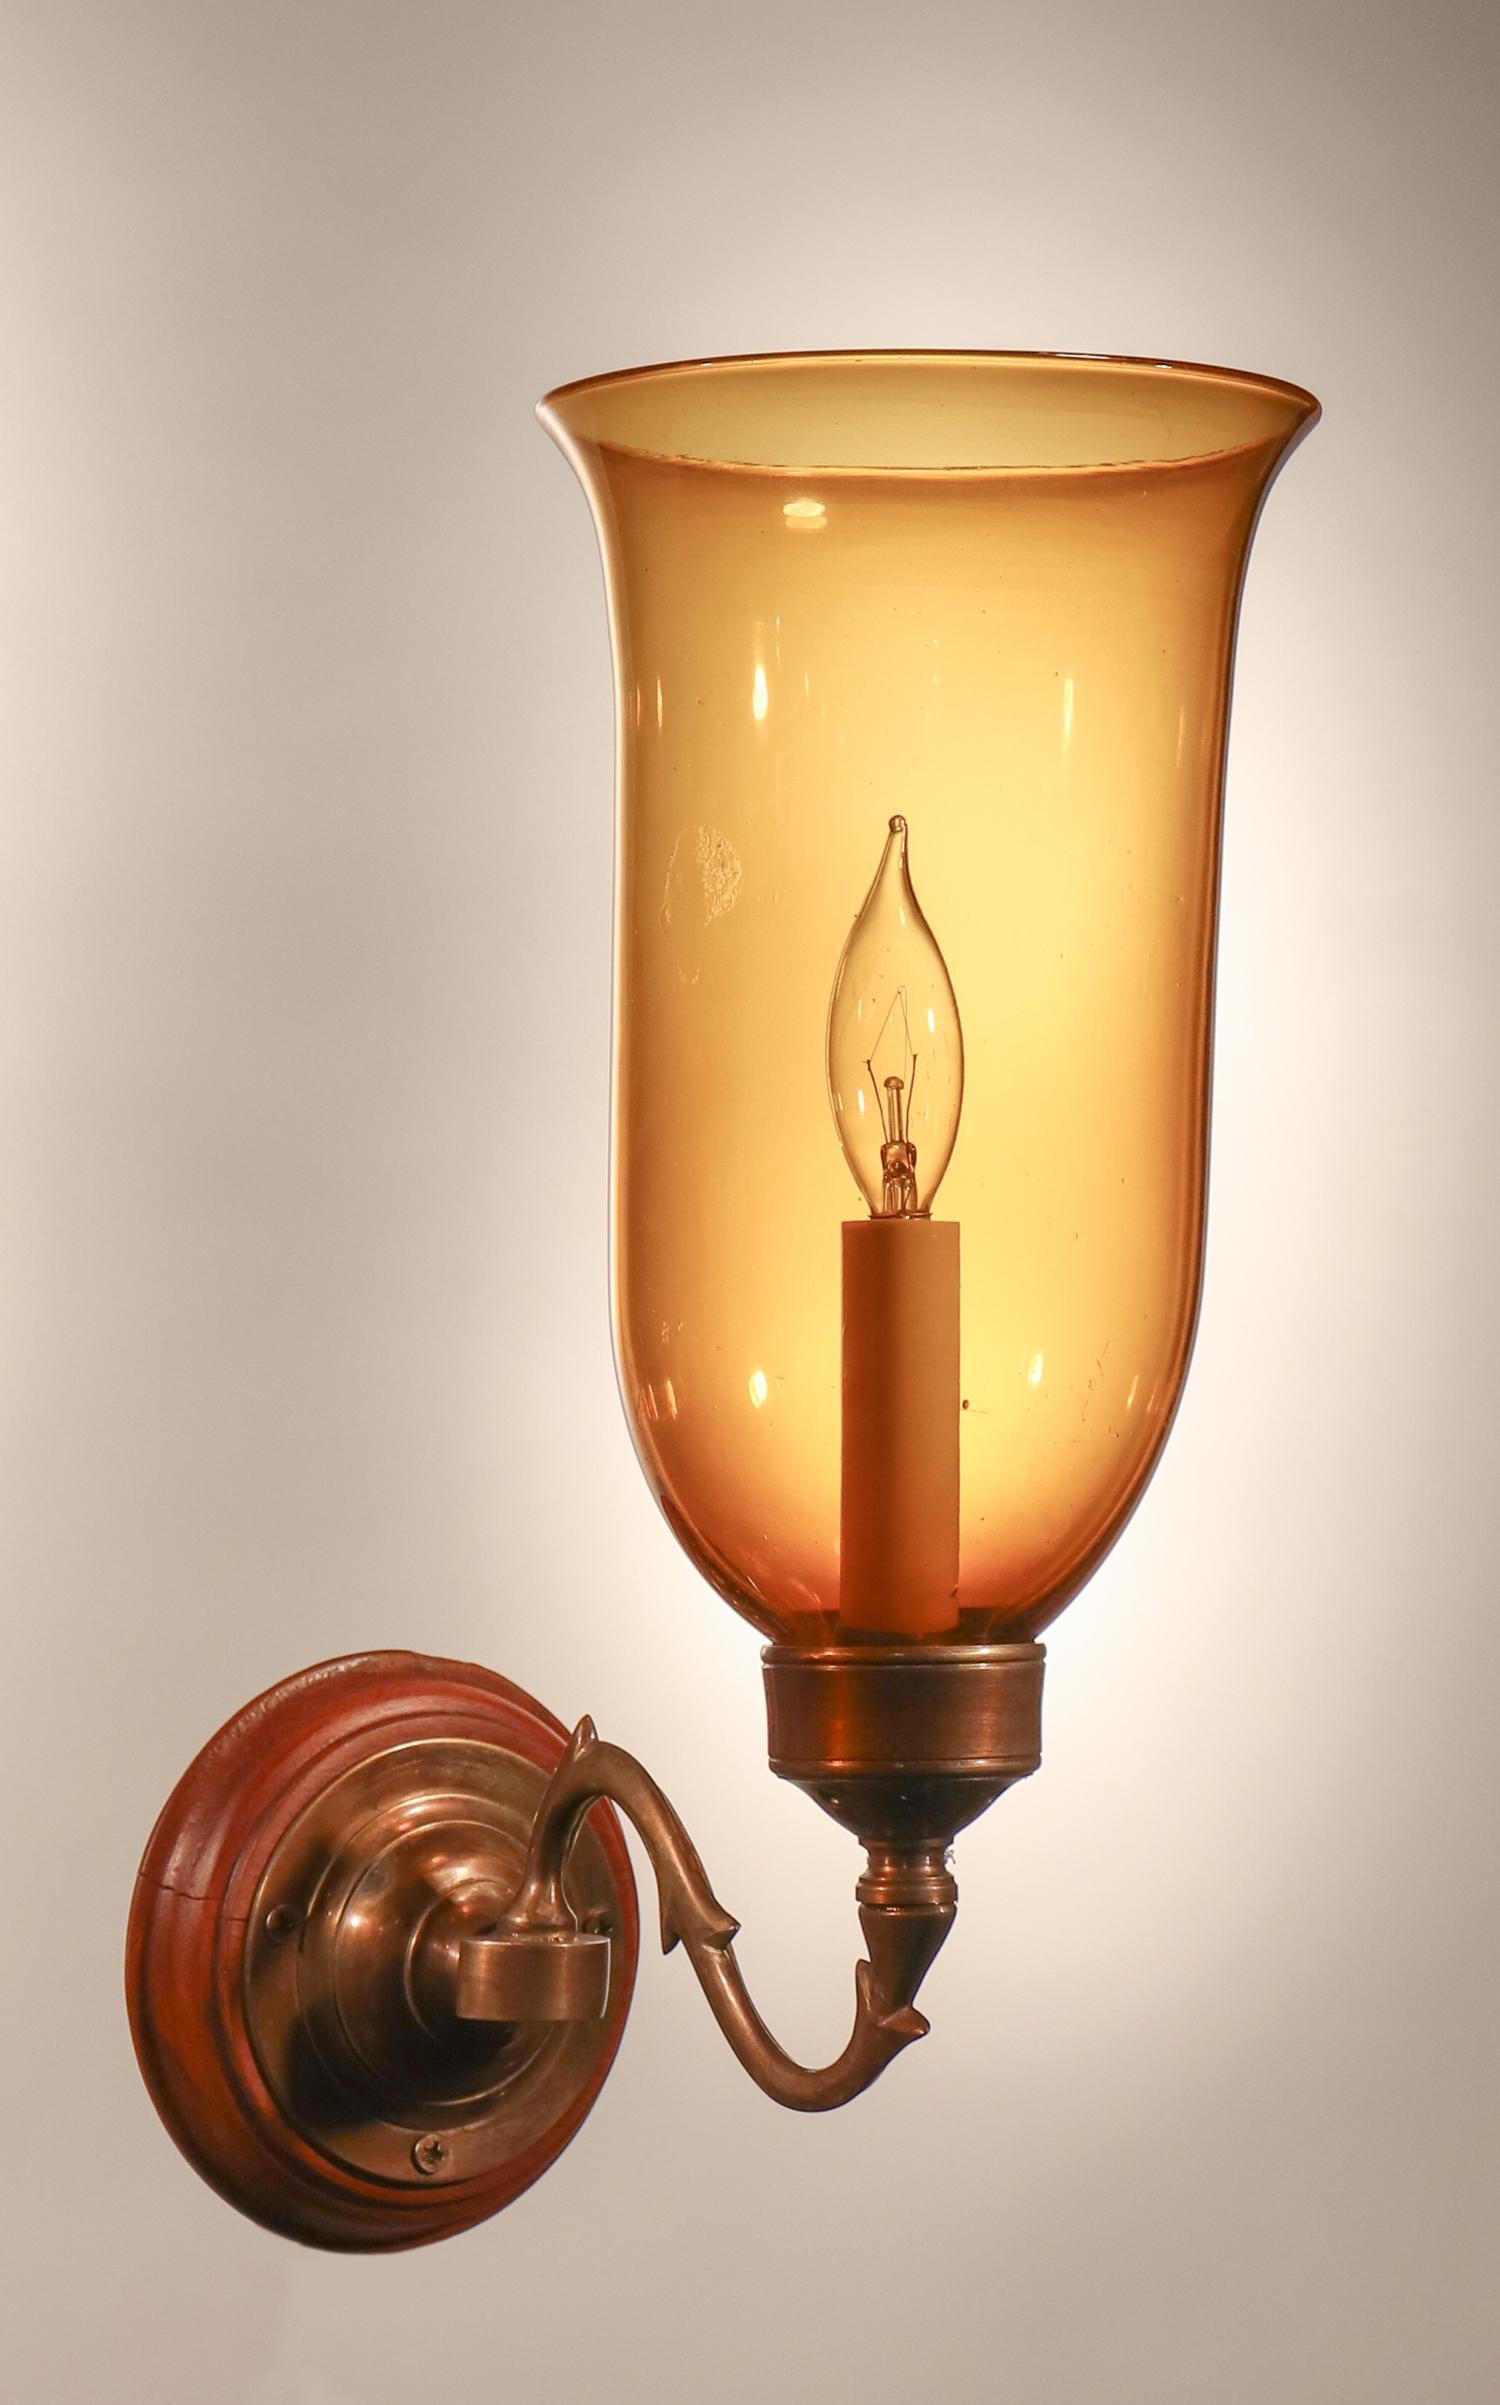 Late Victorian Antique Hurricane Shade Wall Sconces with Amber Colored Glass